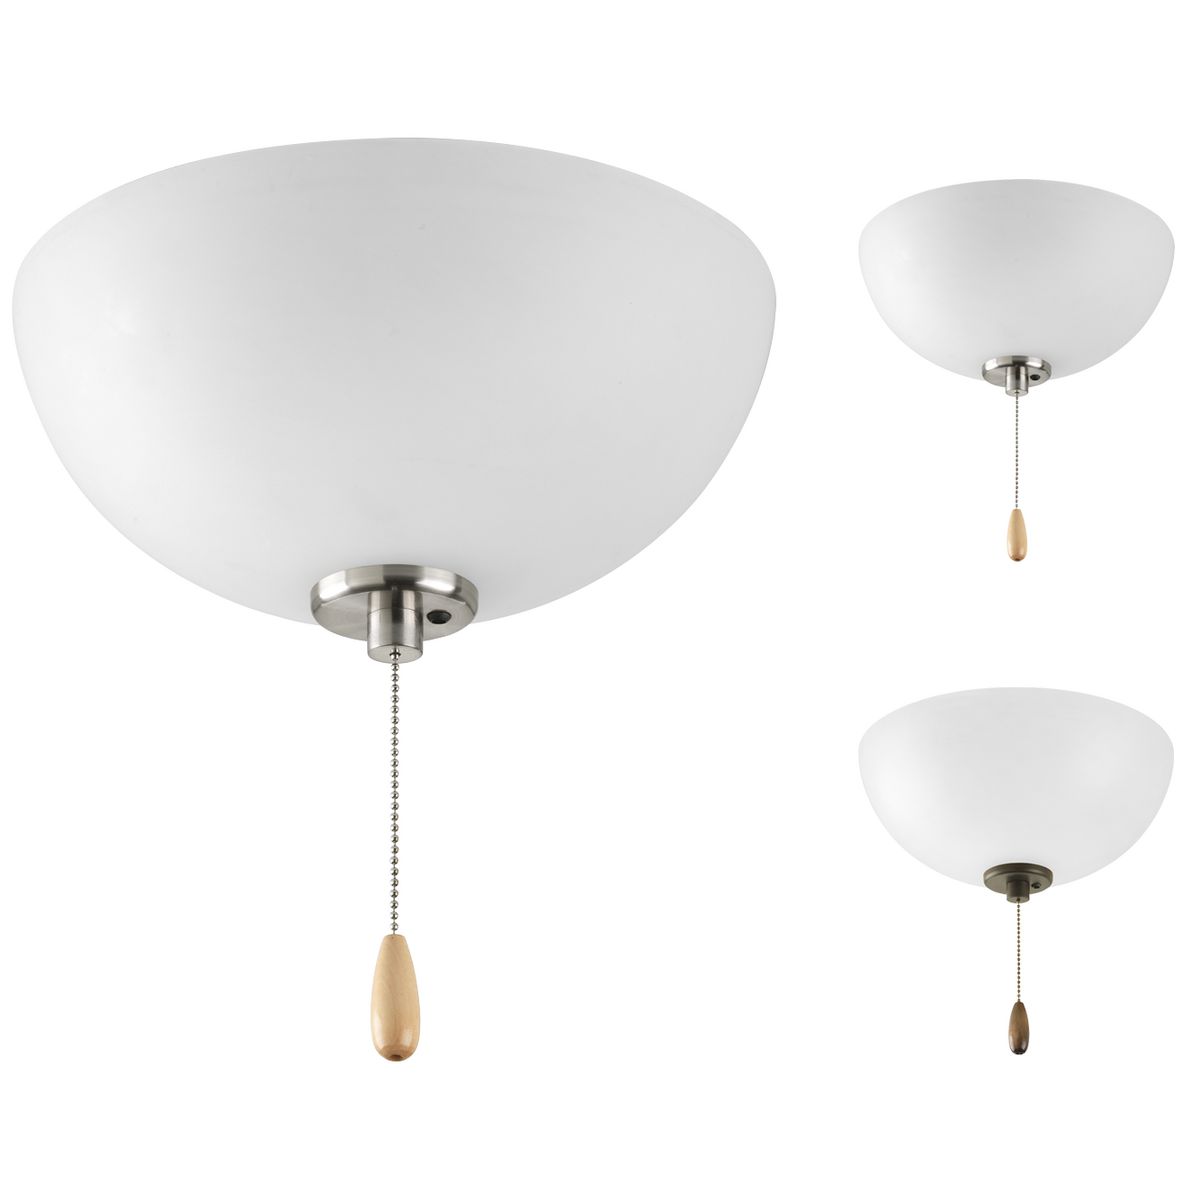 Two-light bowl fan kit with smooth white etched glass. Finials included are -09 Brushed Nickel and -20 Antique Bronze. Coordinates with Gather, Joy, Bravo and many other collections. Convenient universal styling on any Progress fan comes with quick-connect wiring. Includes two 3000K, 800 lumen each (source), Title 24 certified LED bulbs.